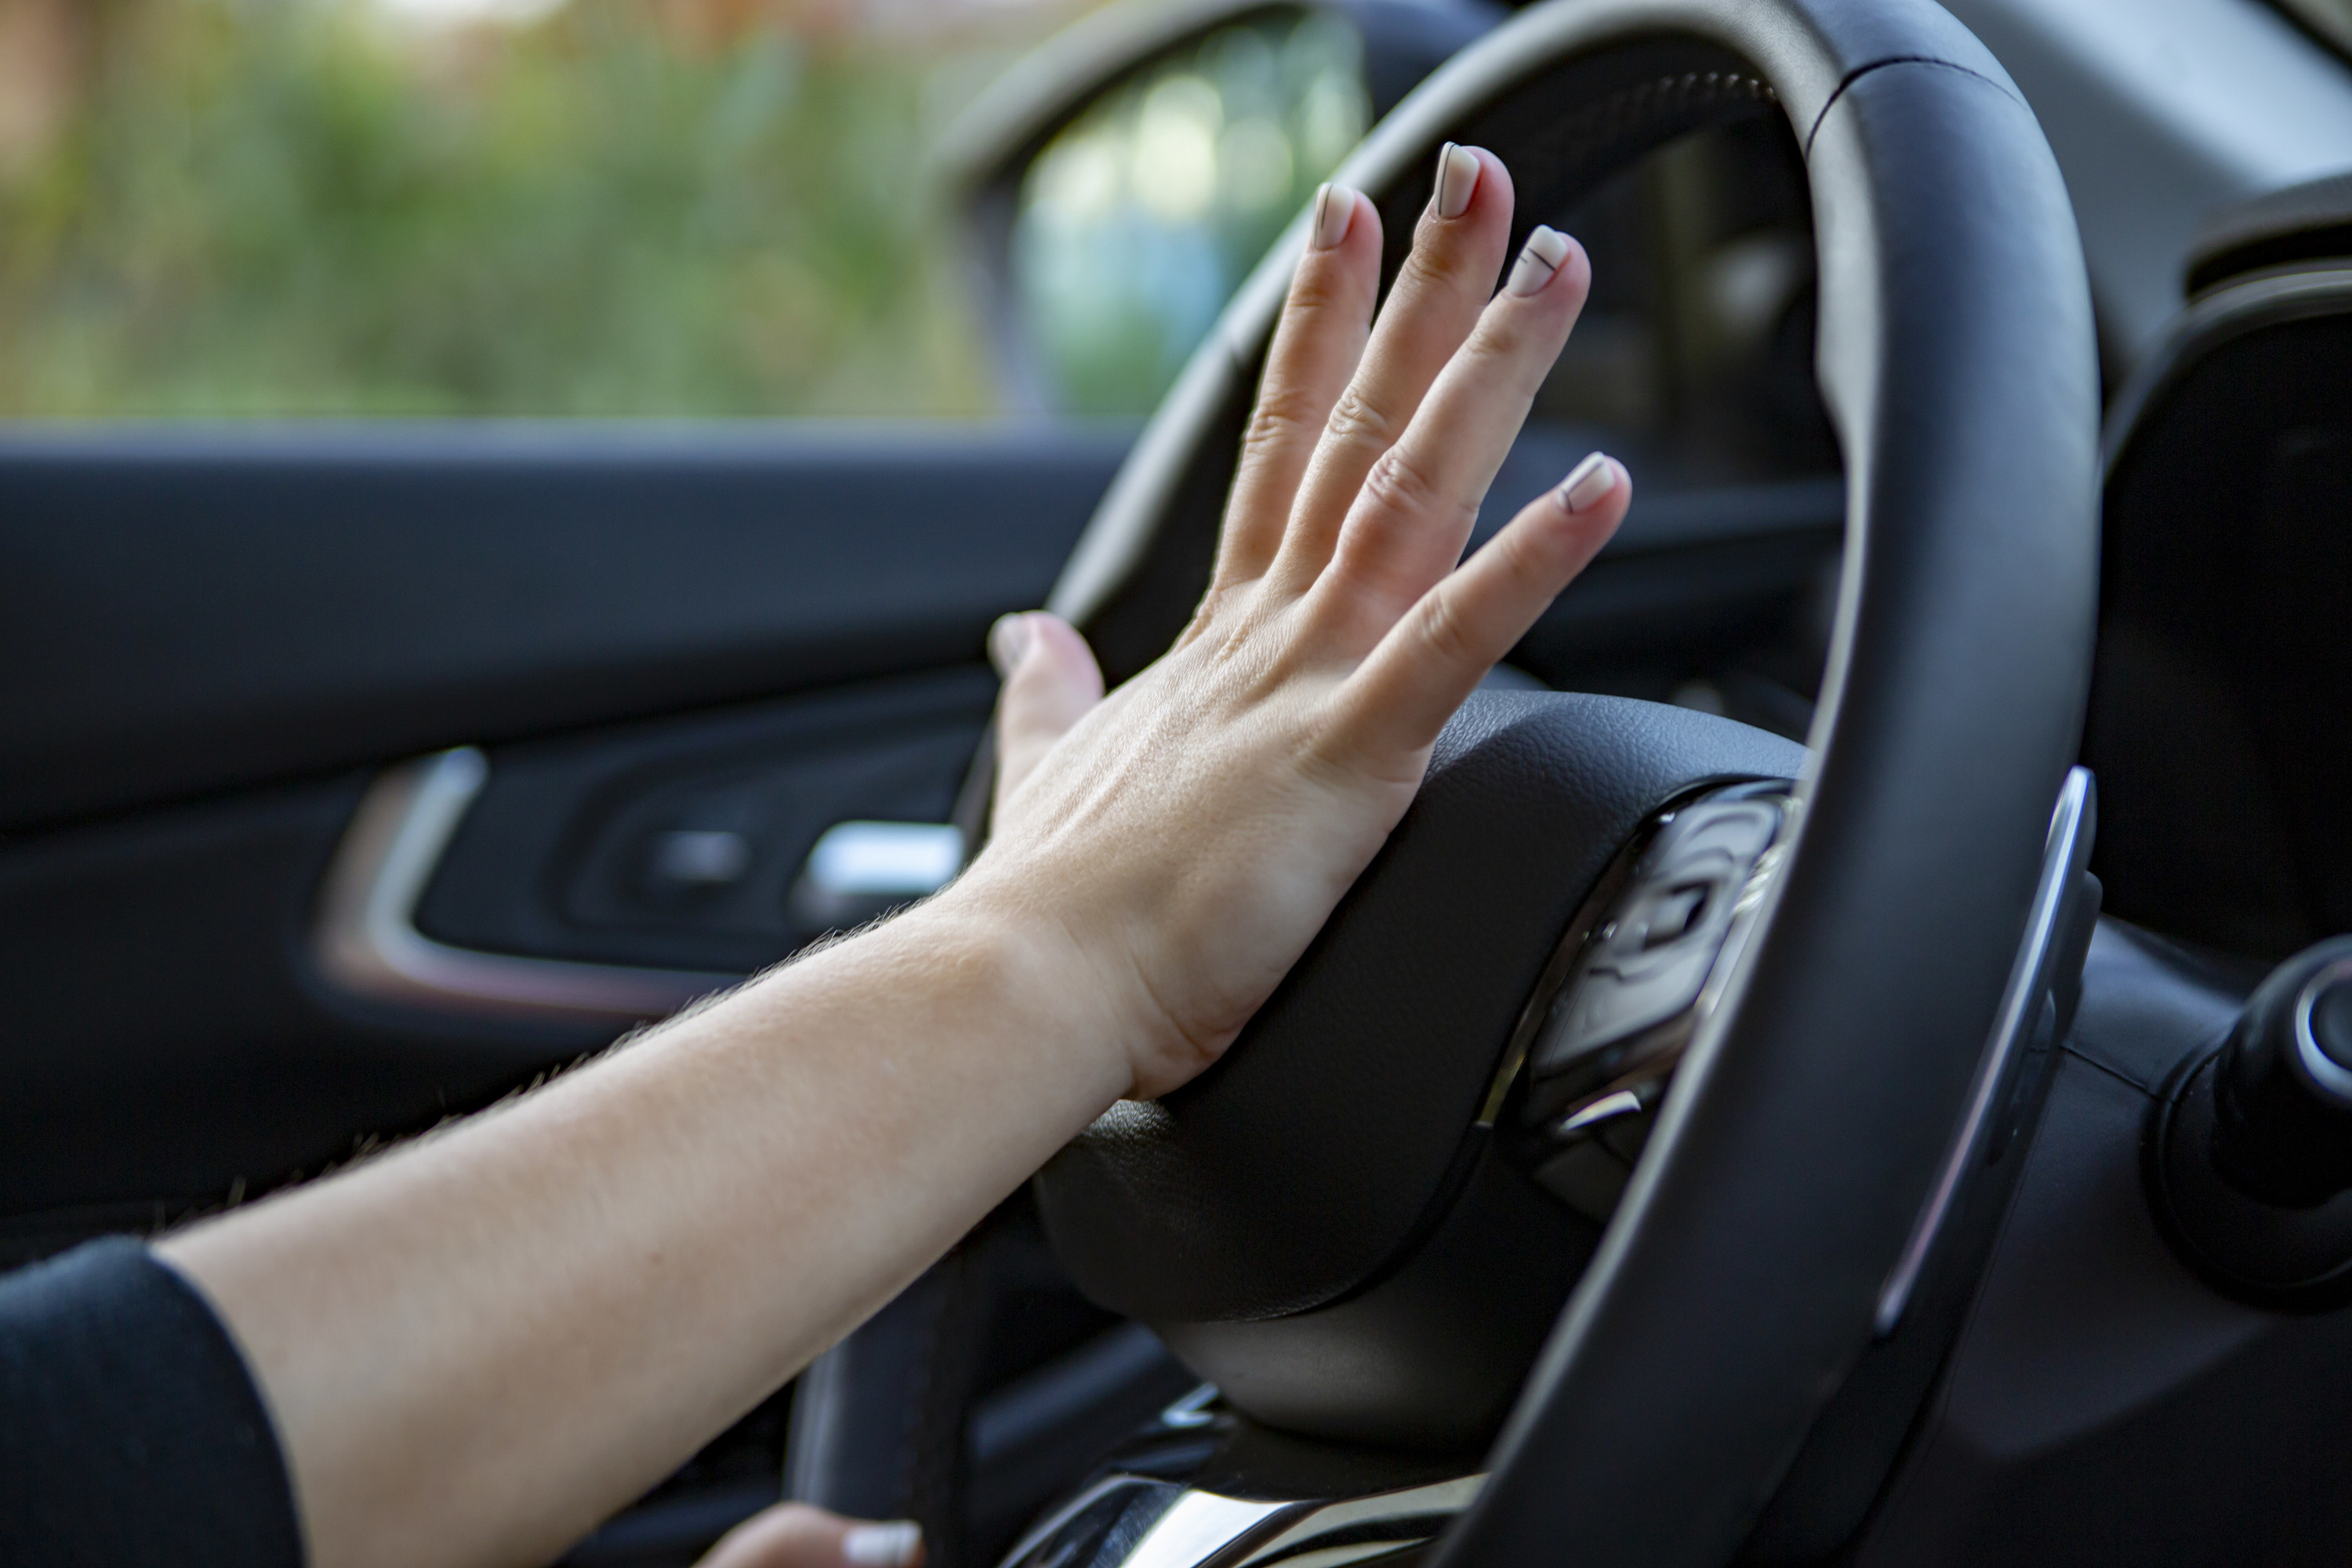 A close up image of a hand honking a car horn